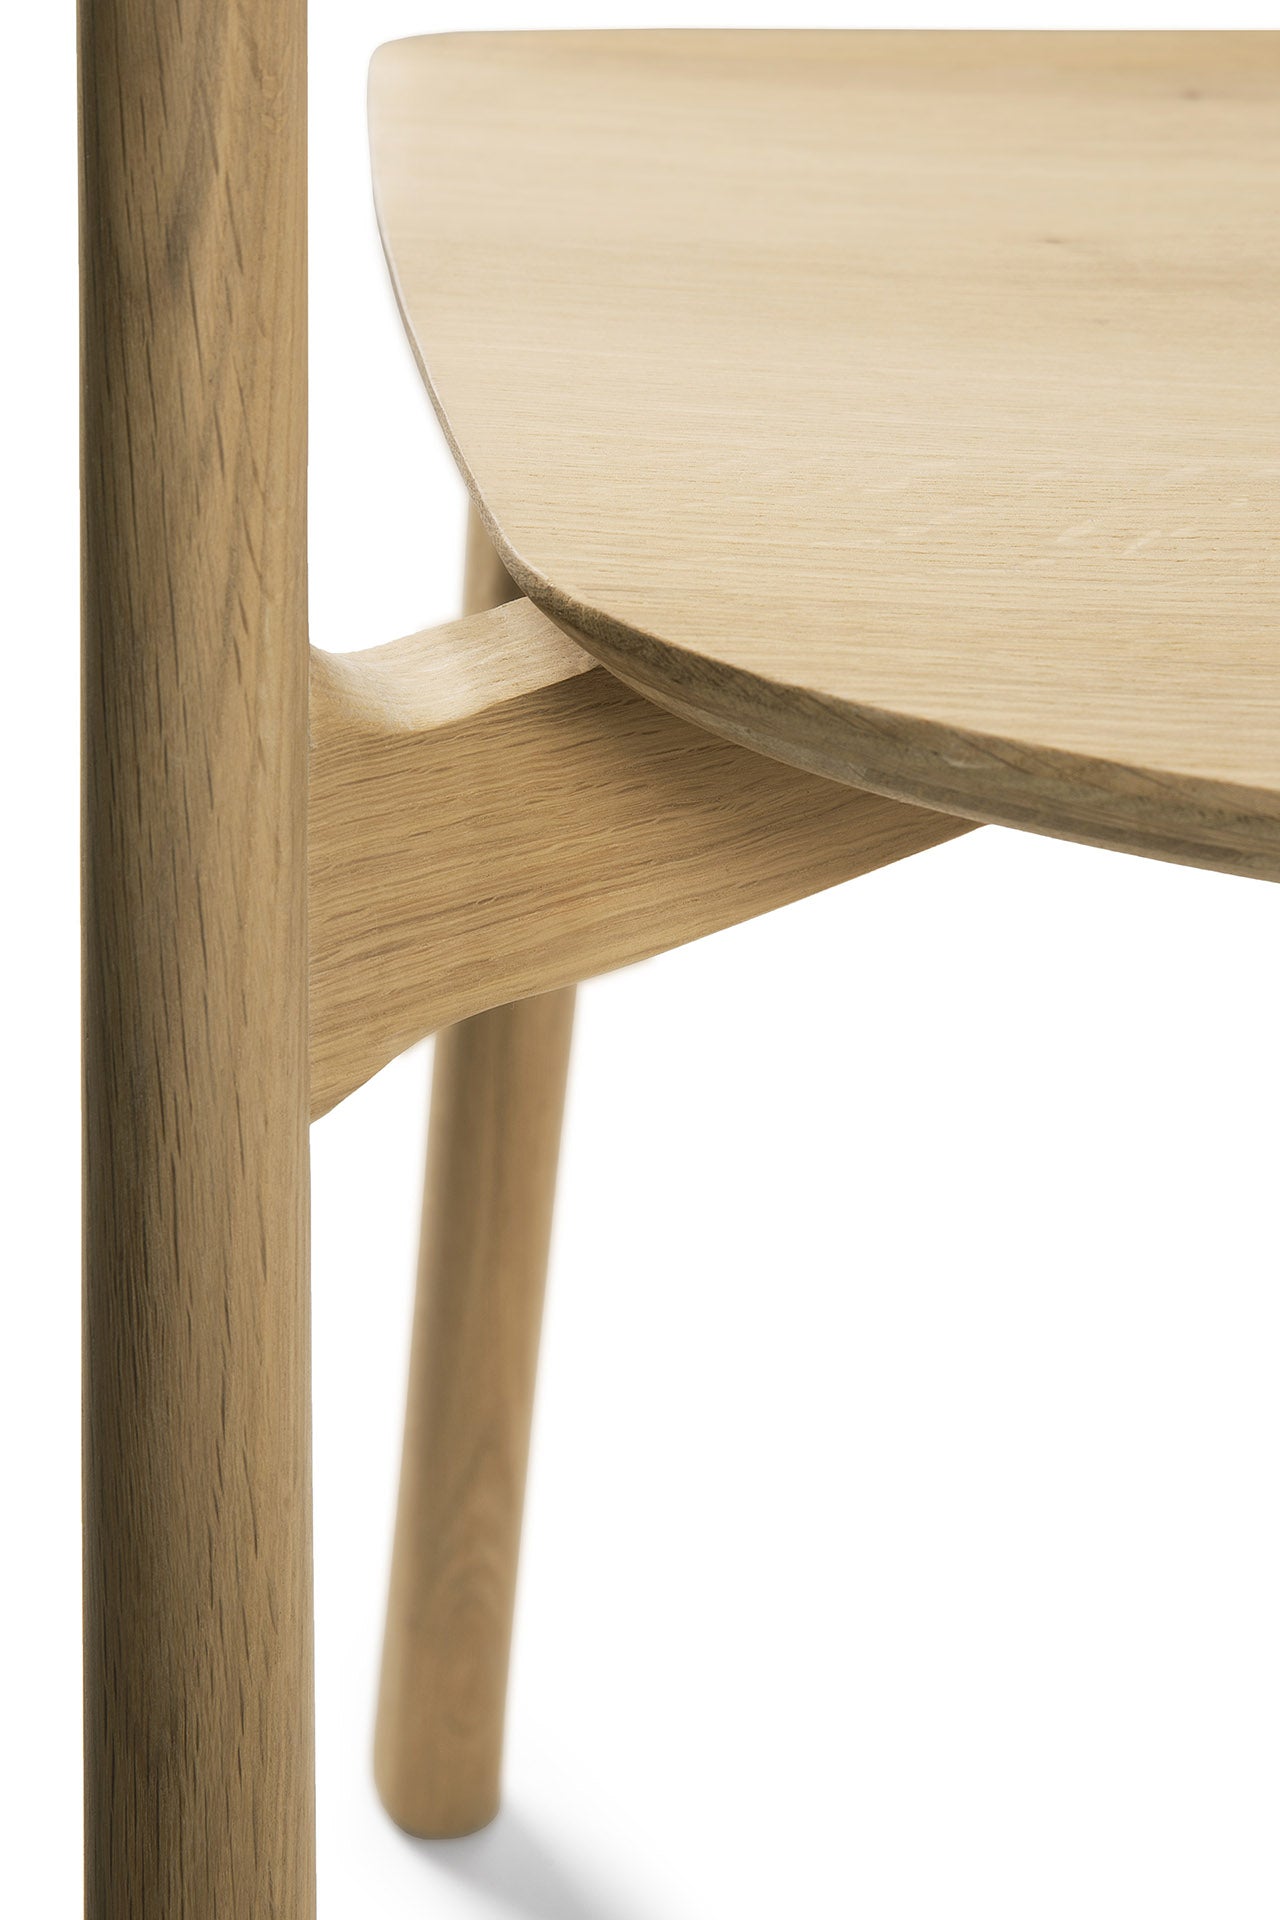 Ethnicraft Oak Bok Dining Chair is available from Make Your House A Home, Bendigo, Victoria, Australia